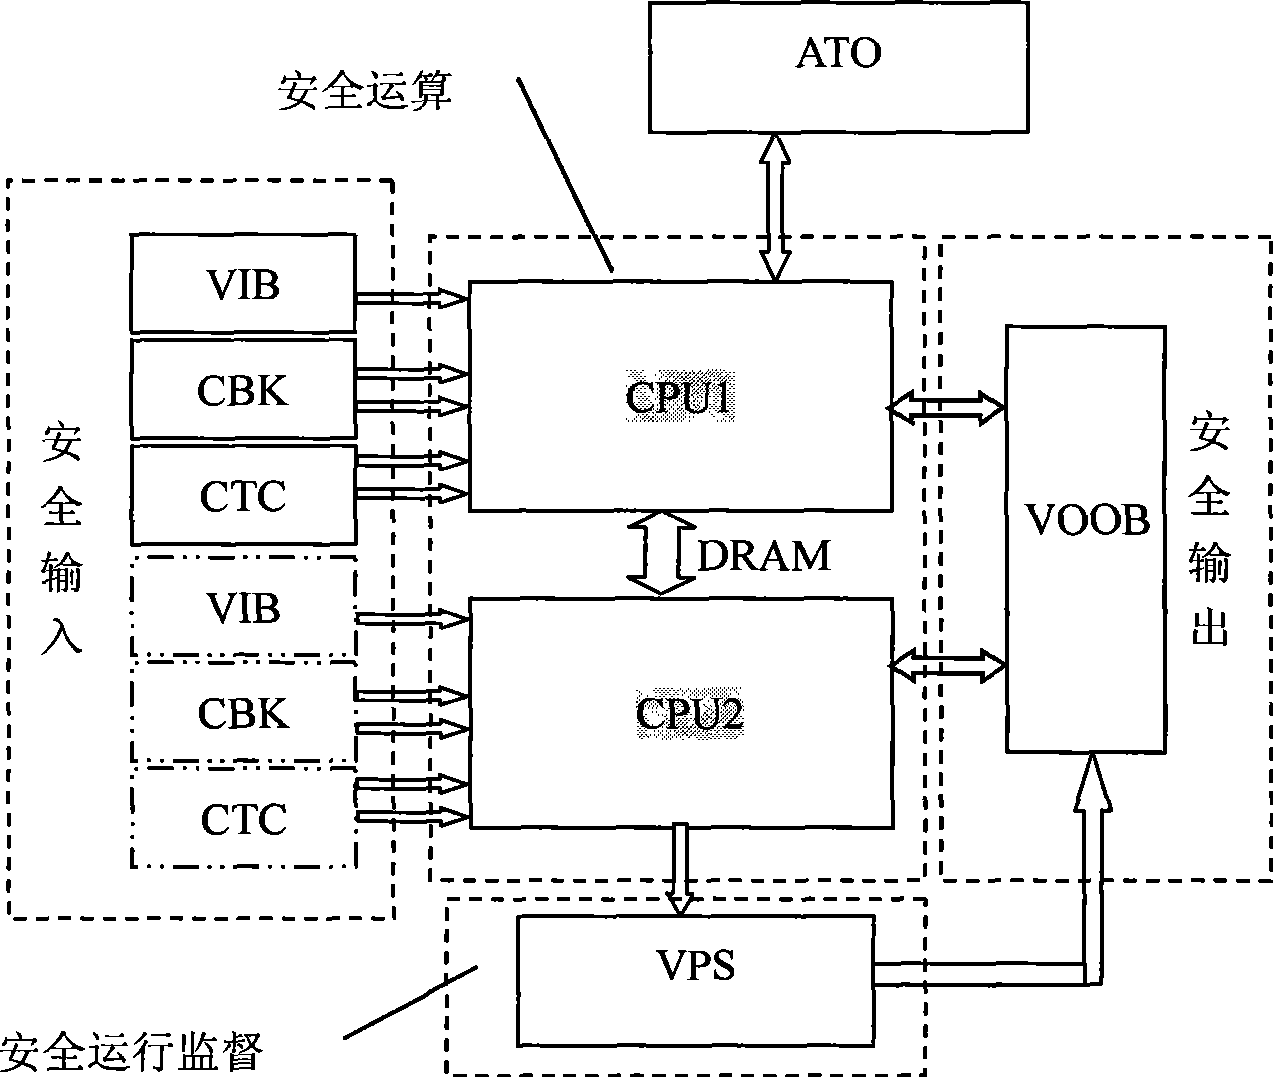 Fault tolerant safety processor in railway signaling system